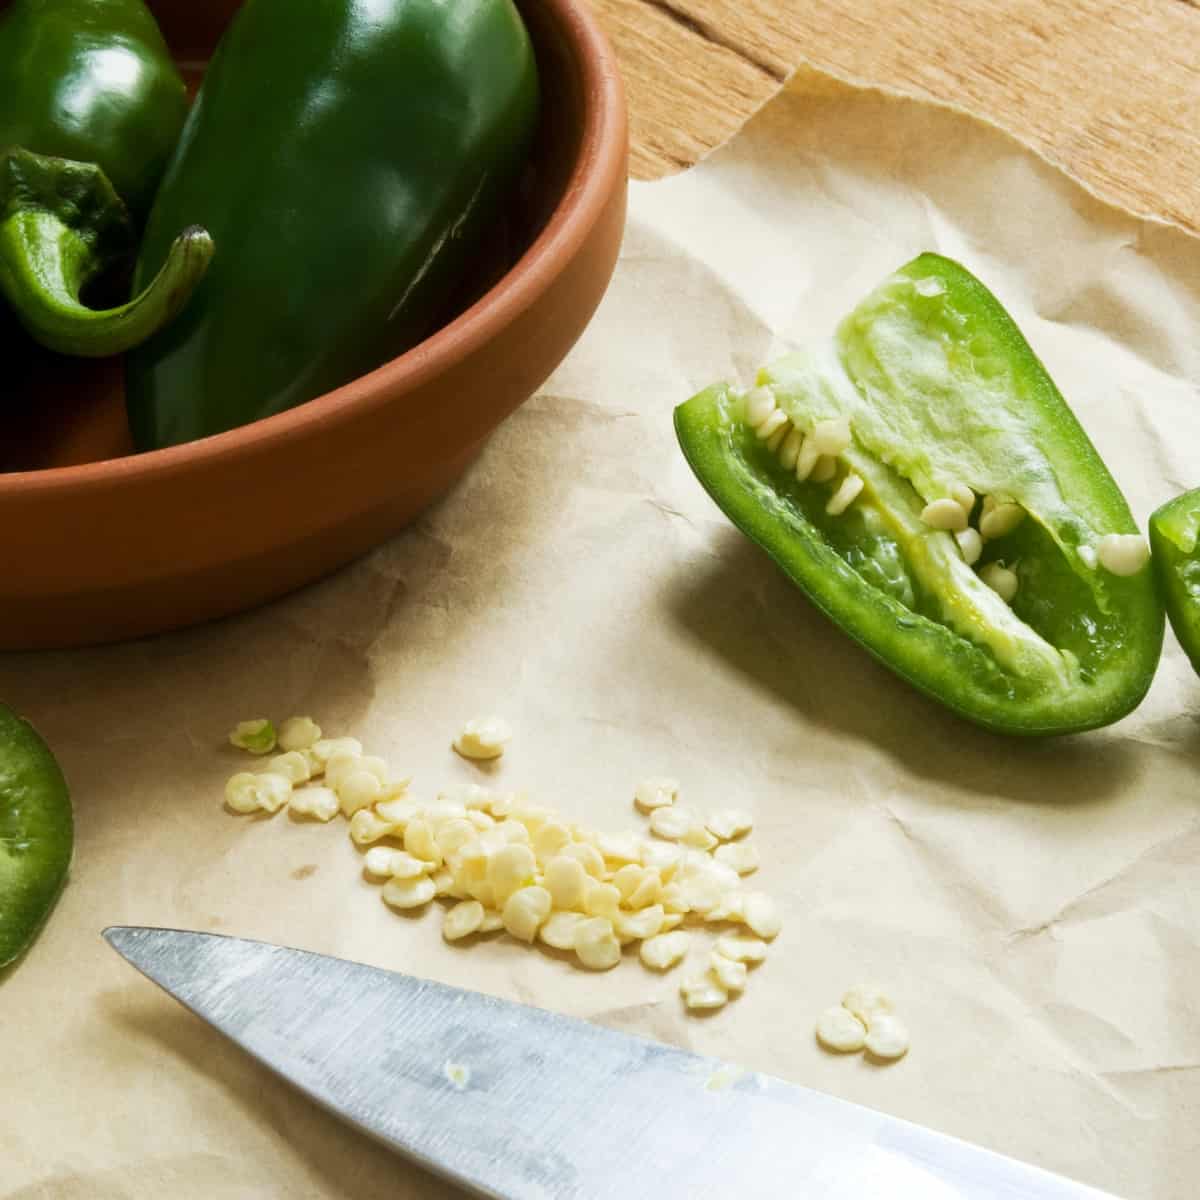 What are jalapenos